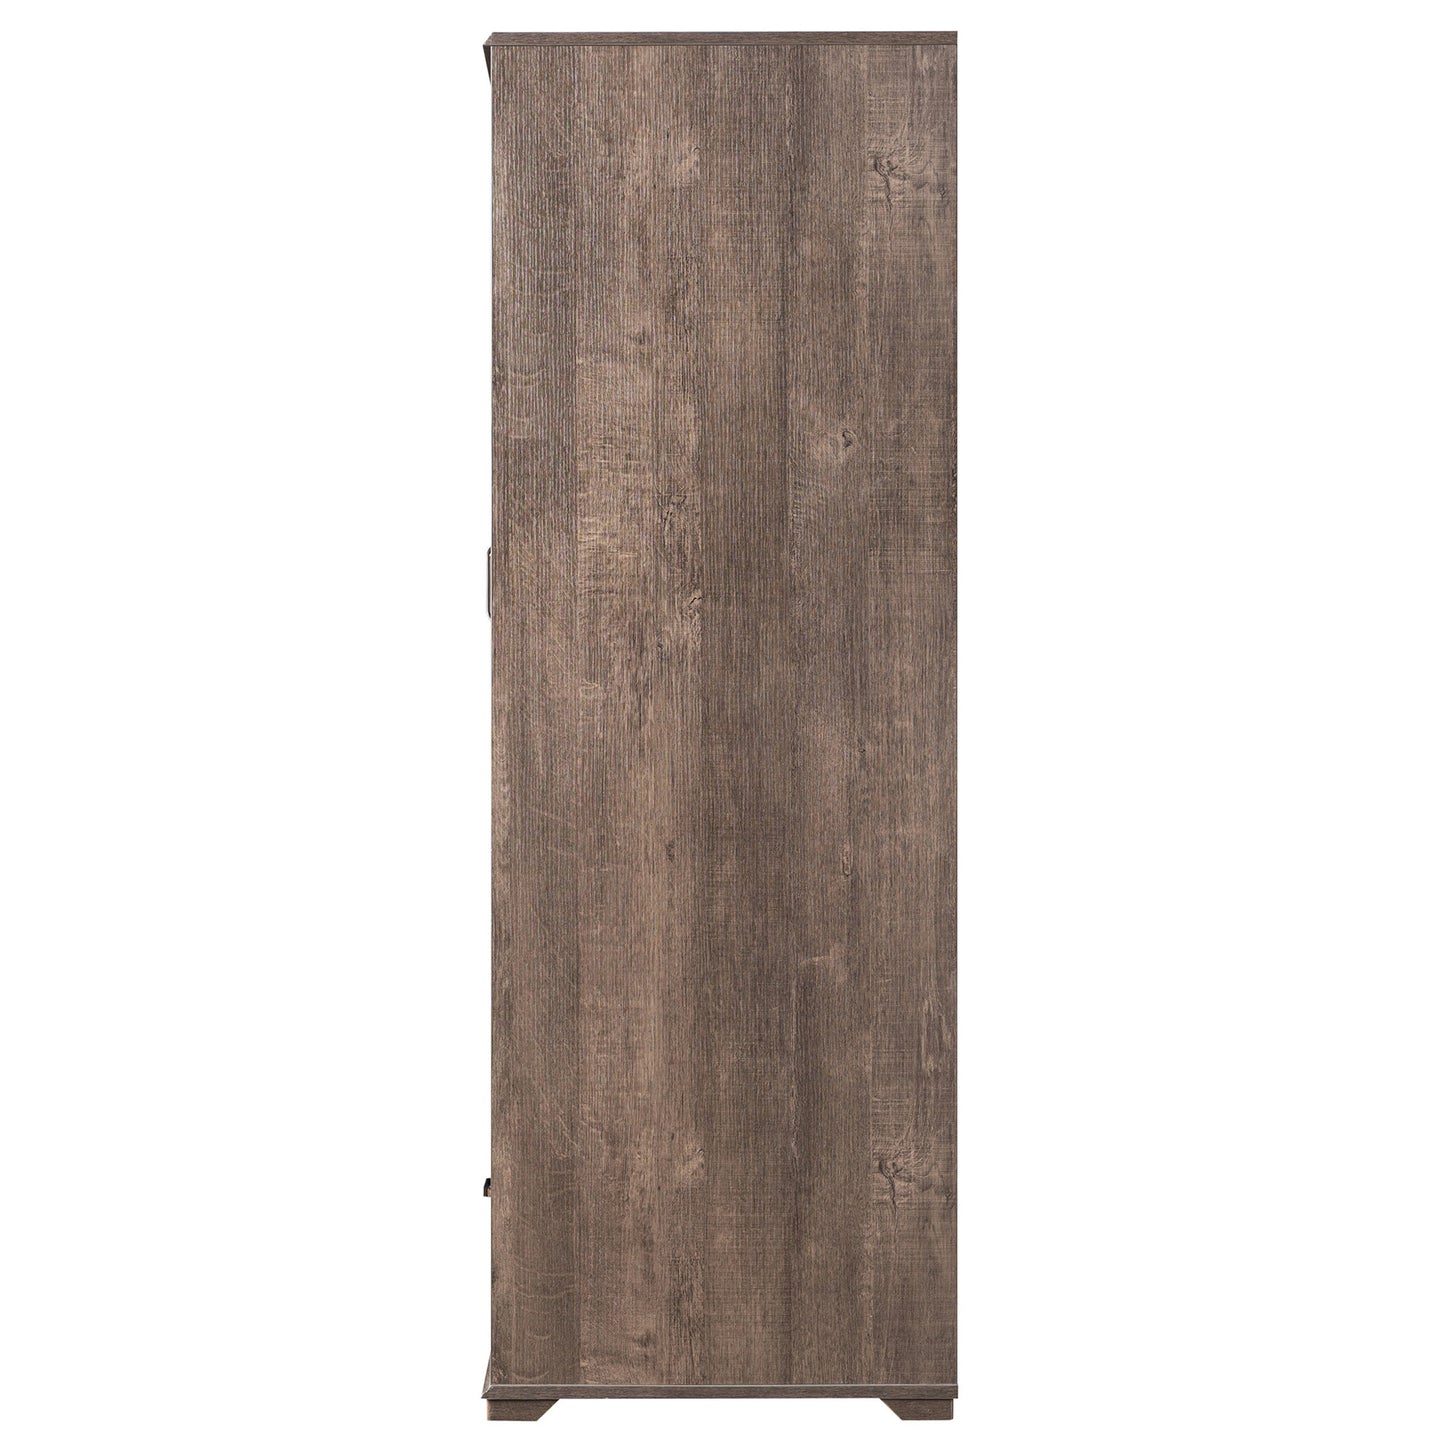 Front-facing side view of a contemporary walnut two-door one-drawer wardrobe armoire on a white background